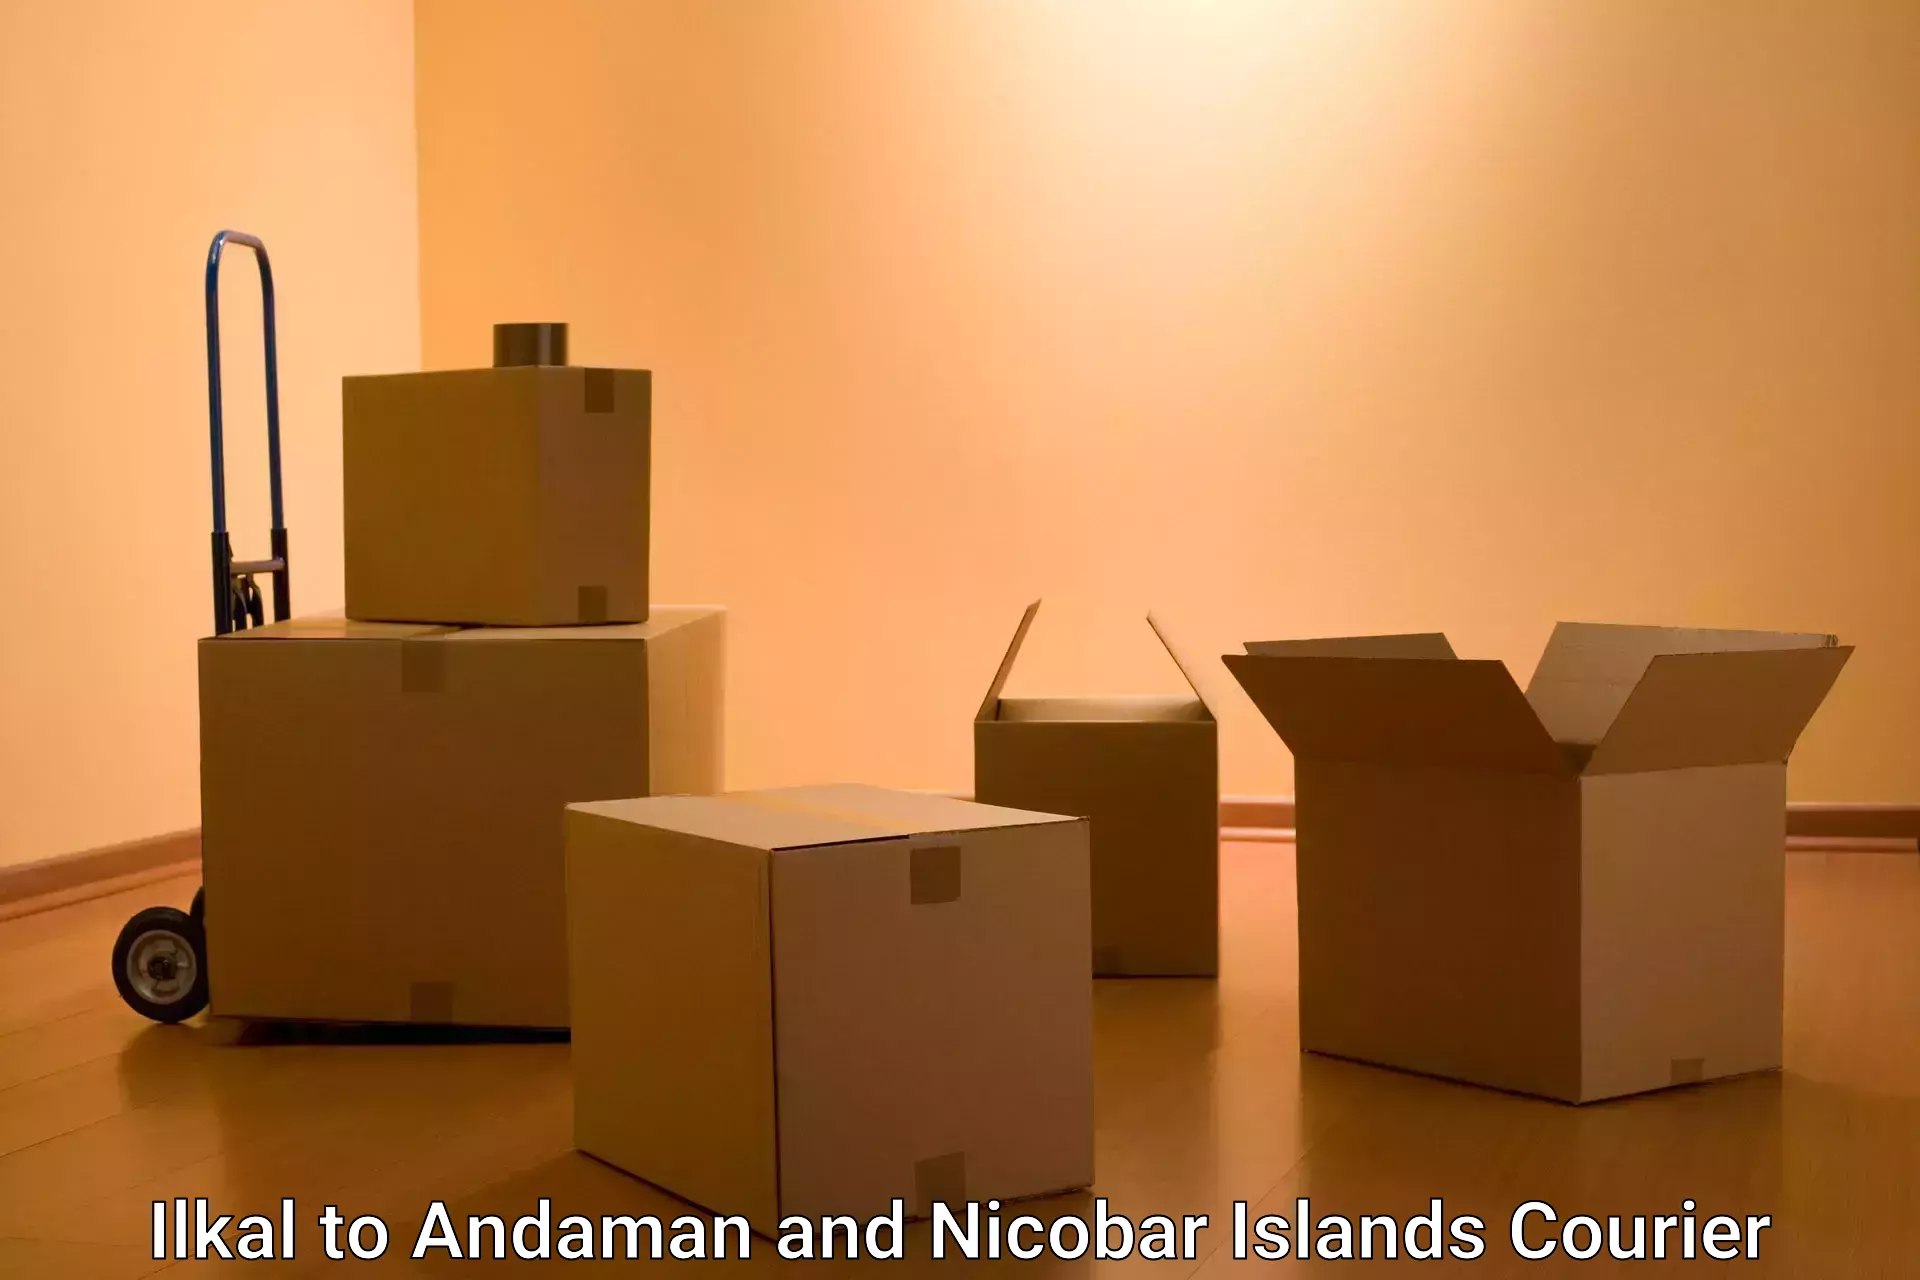 Courier insurance Ilkal to Andaman and Nicobar Islands